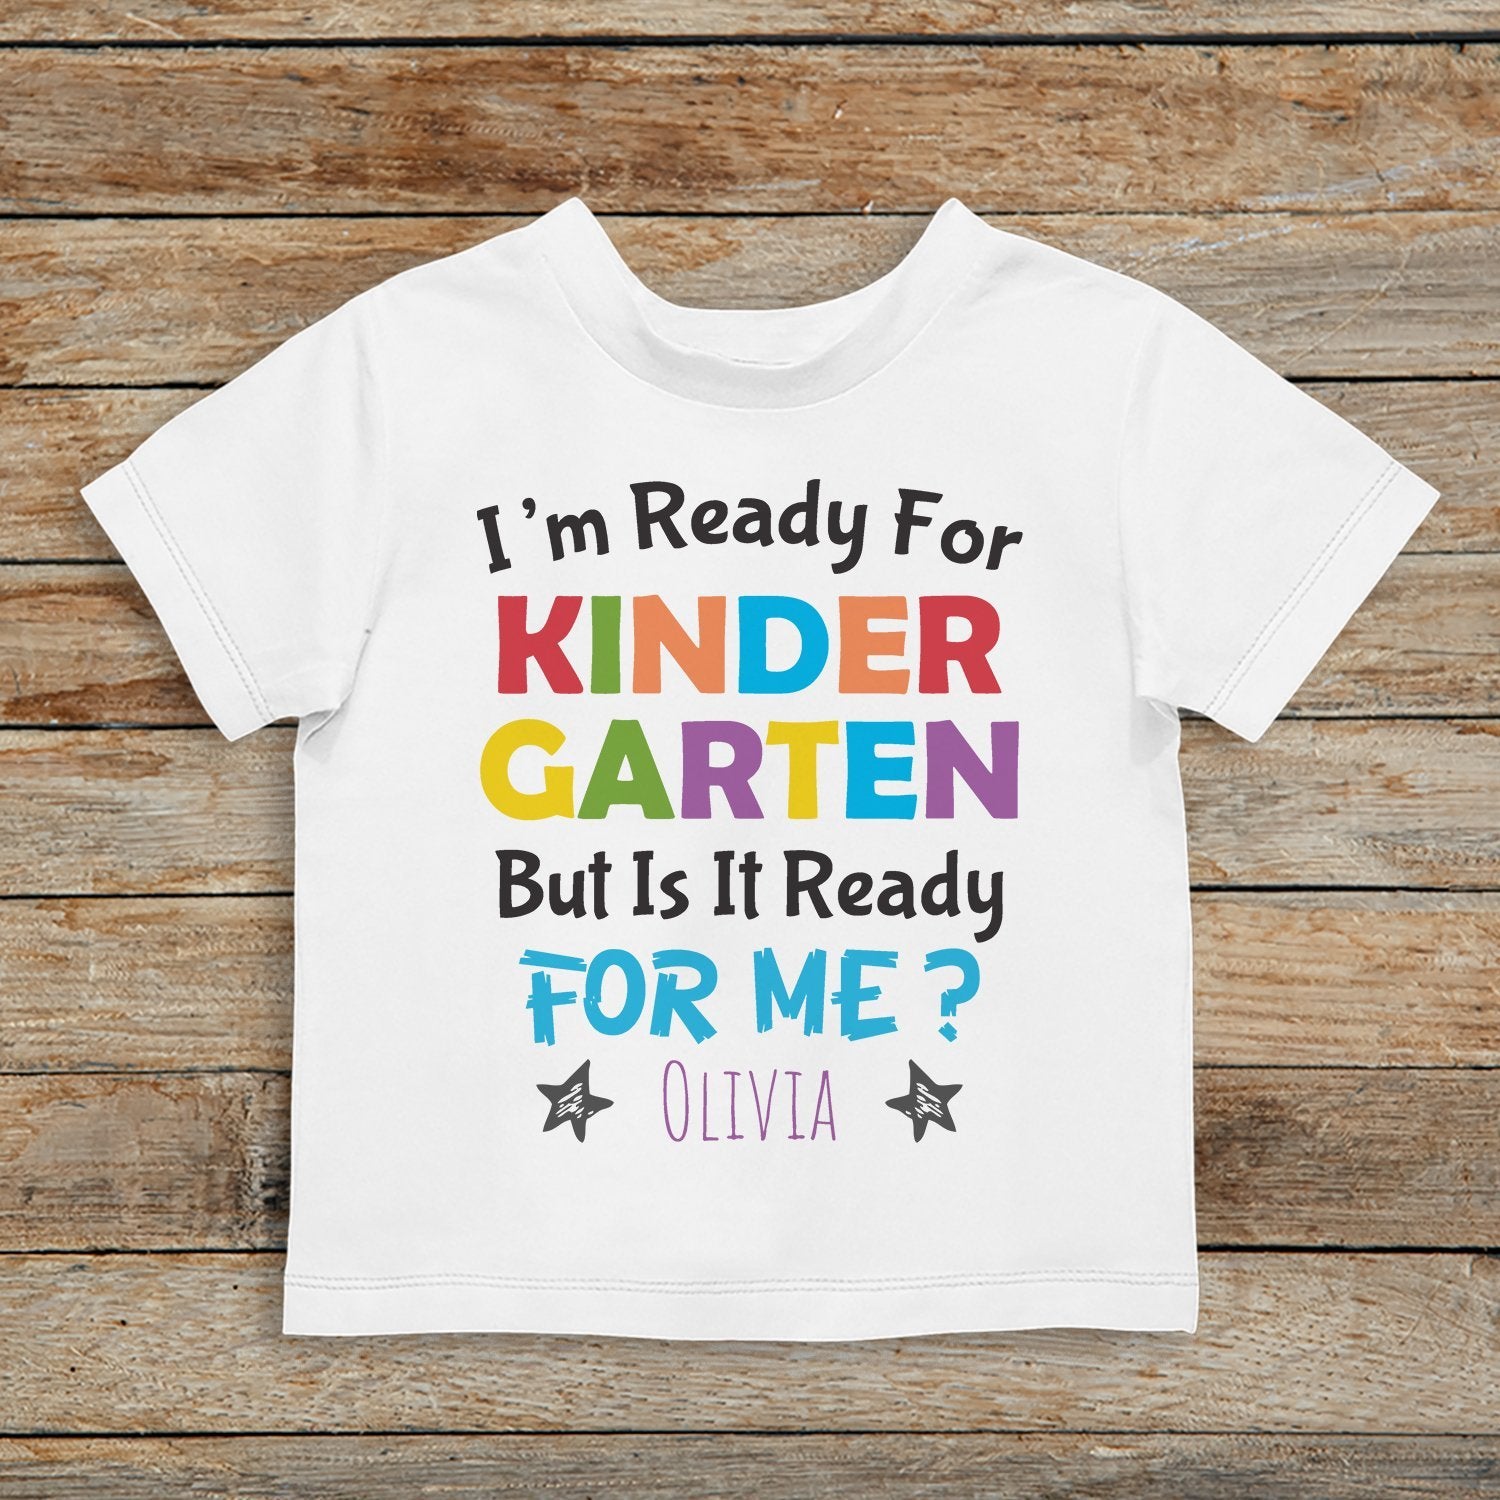 I'm Ready For Kindergarten But Is It Ready For Me, Personalized Name Shirt For Kids